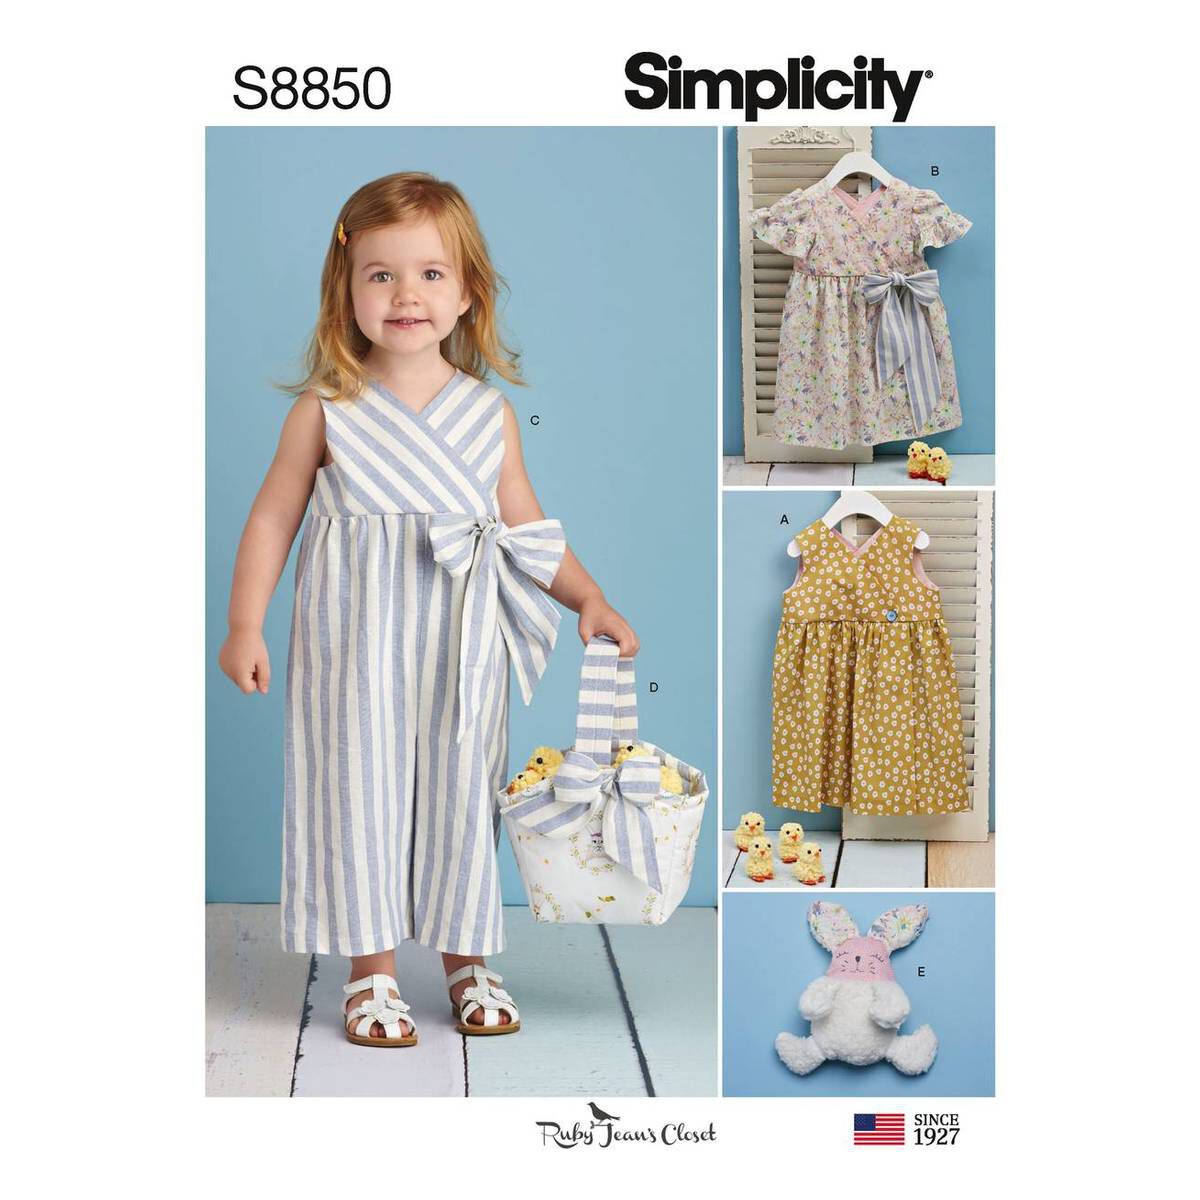 Simplicity Toddler Dress and Accessories Sewing Pattern S8850 | Hobbycraft